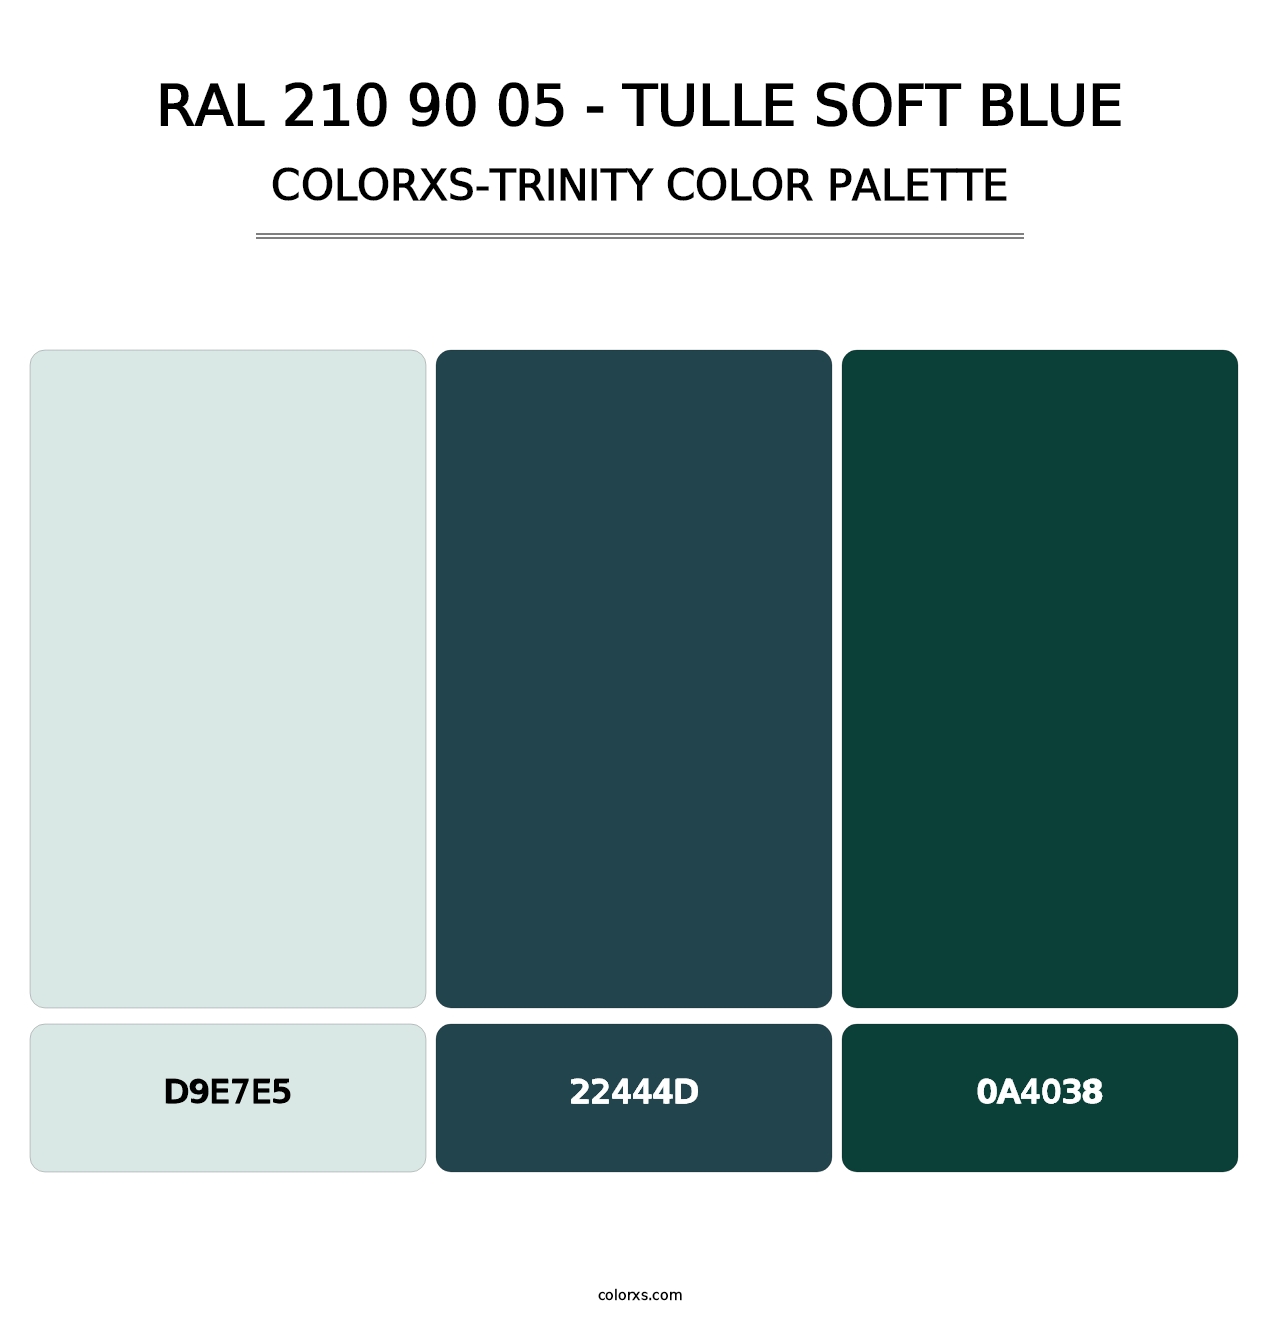 RAL 210 90 05 - Tulle Soft Blue - Colorxs Trinity Palette